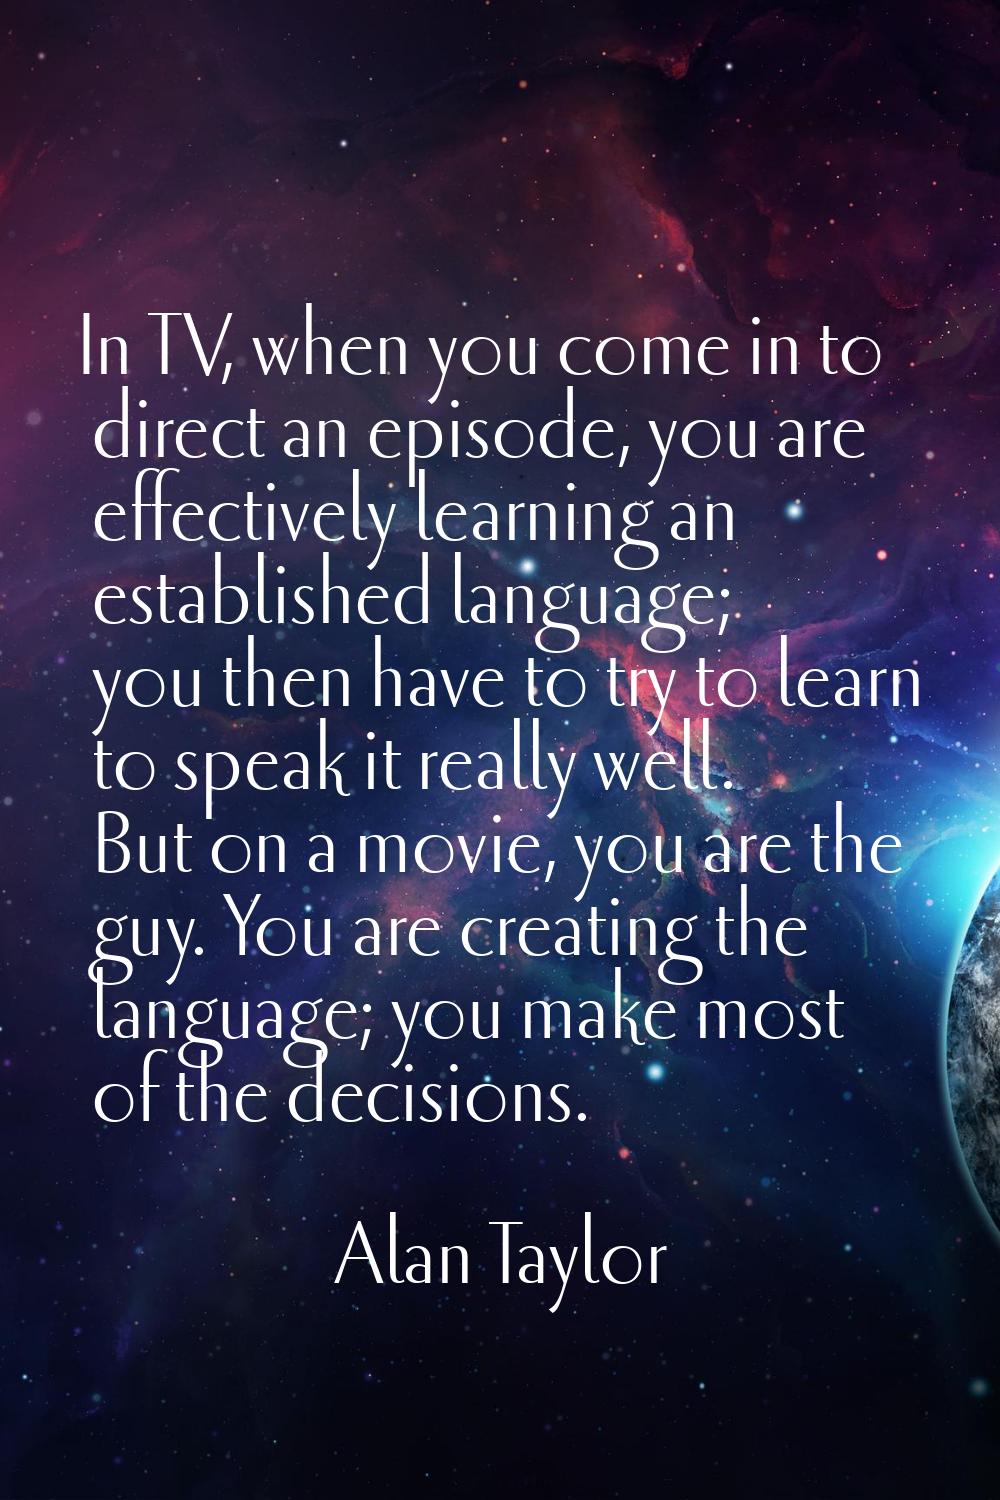 In TV, when you come in to direct an episode, you are effectively learning an established language;